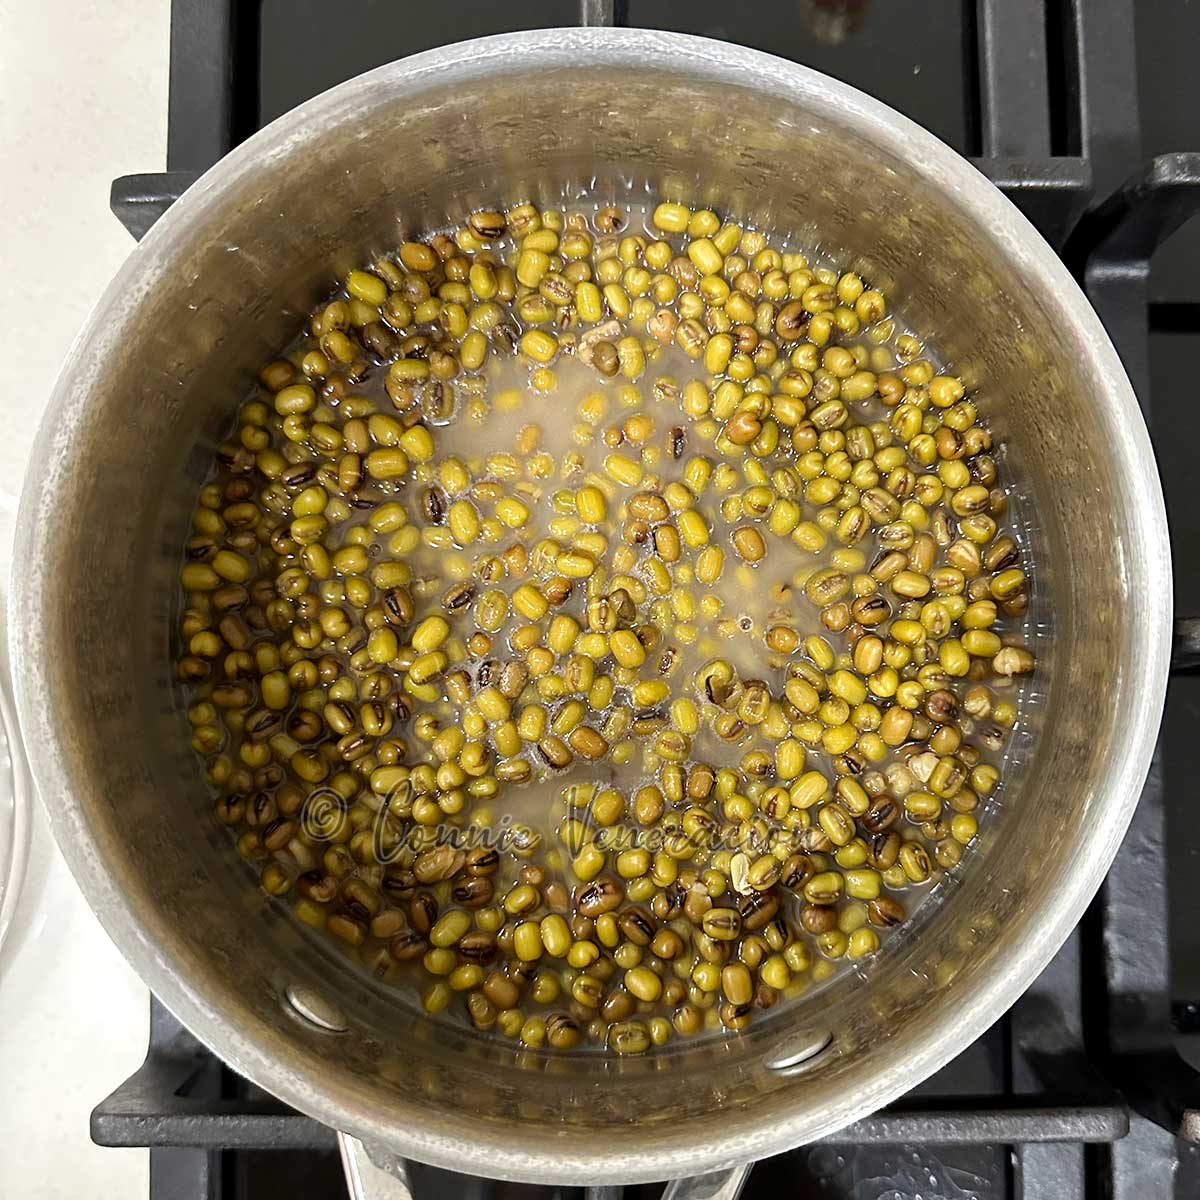 Parboiled dried mung beans